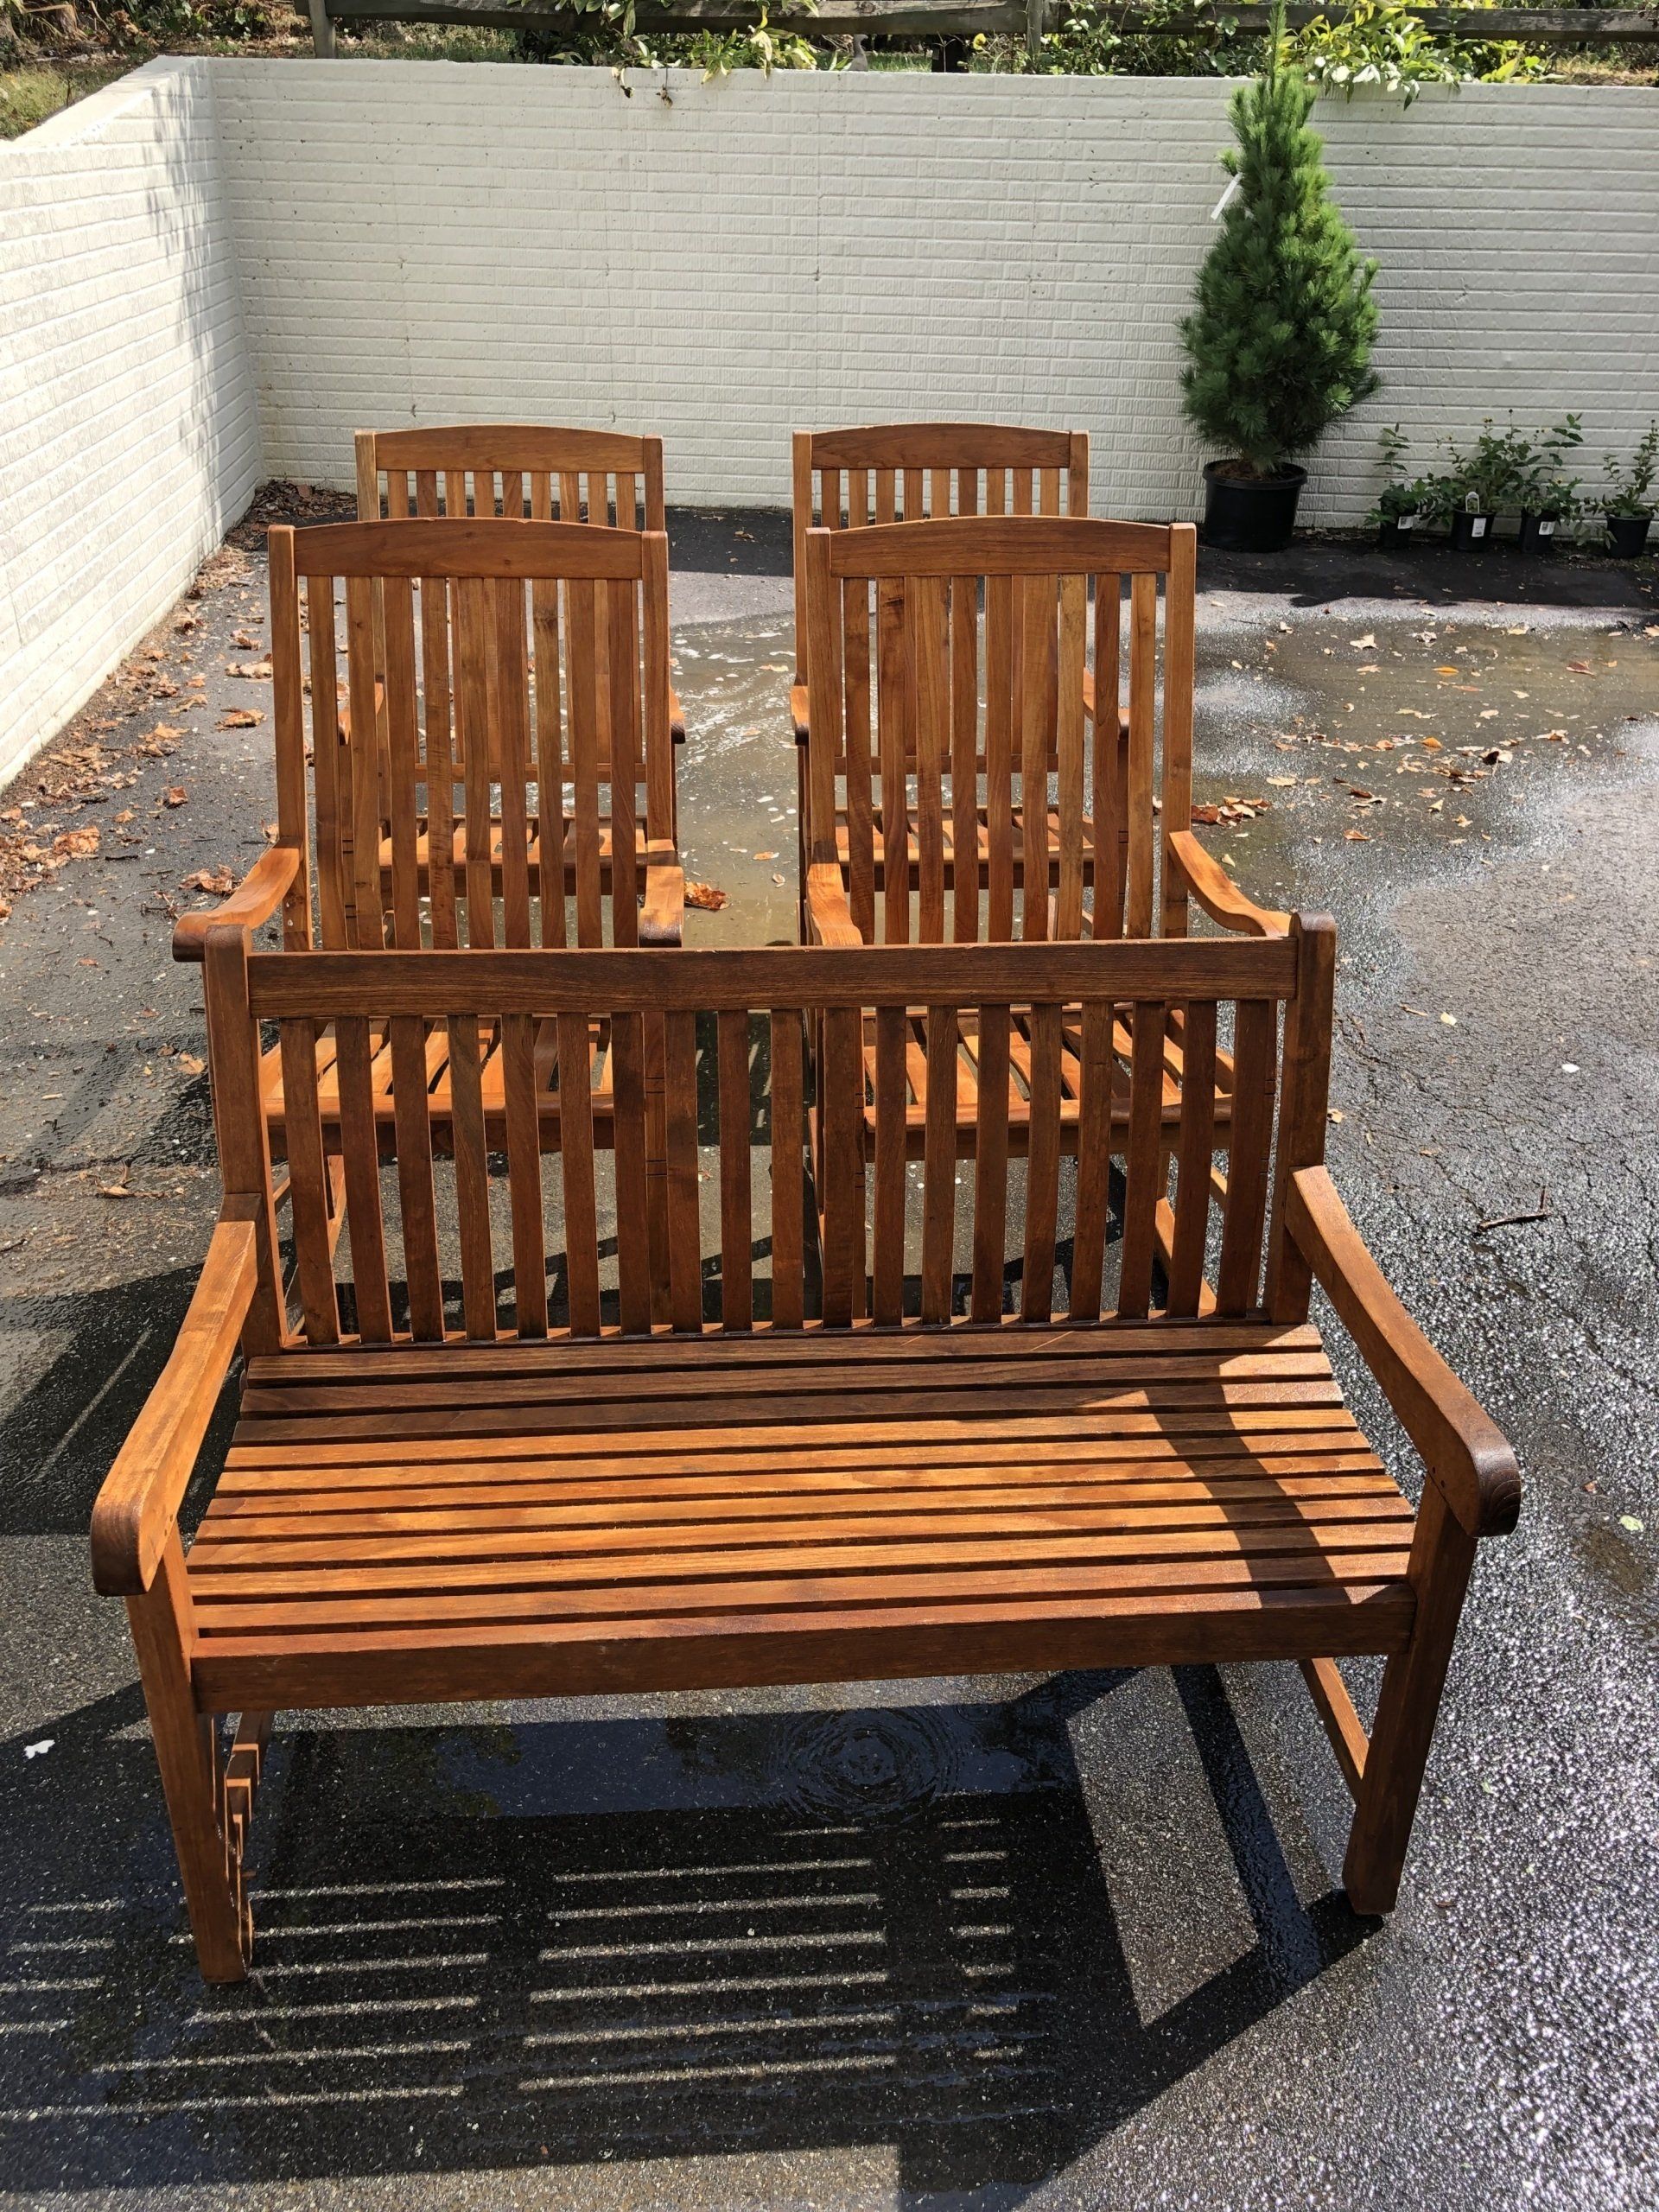 cleaned new look old wood chairs